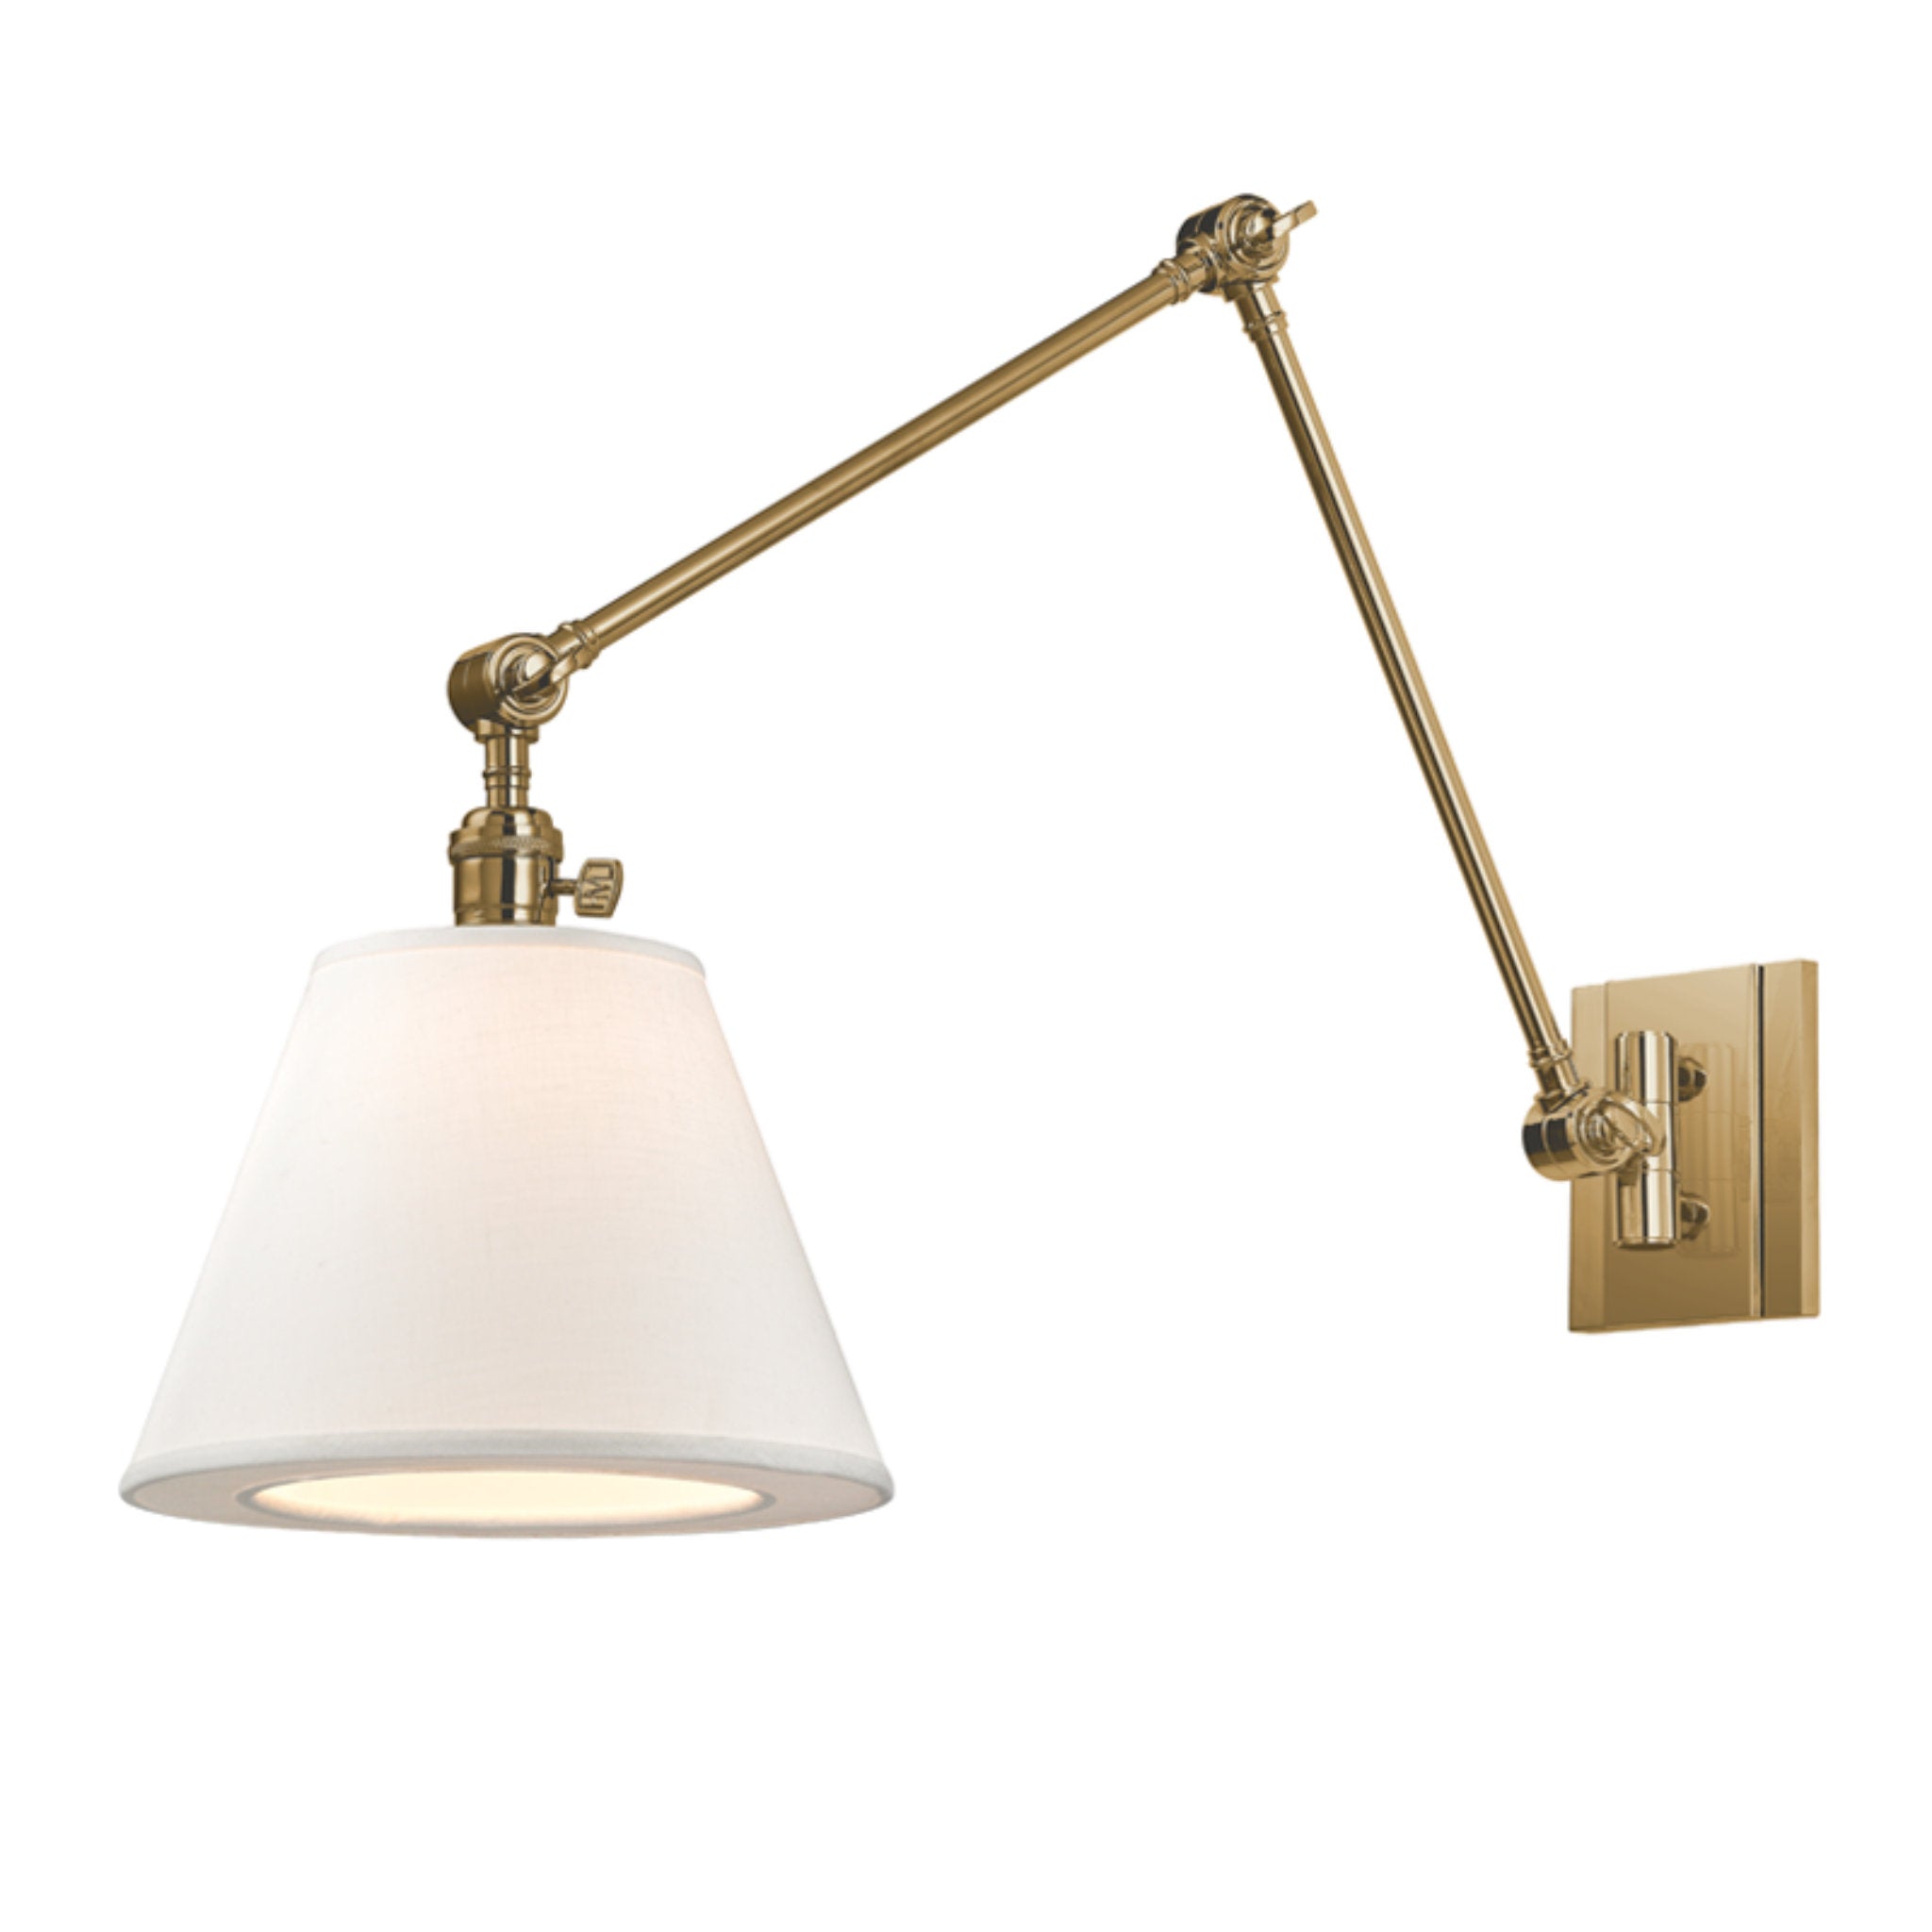 Hillsdale 1 Light Wall Sconce in Aged Brass